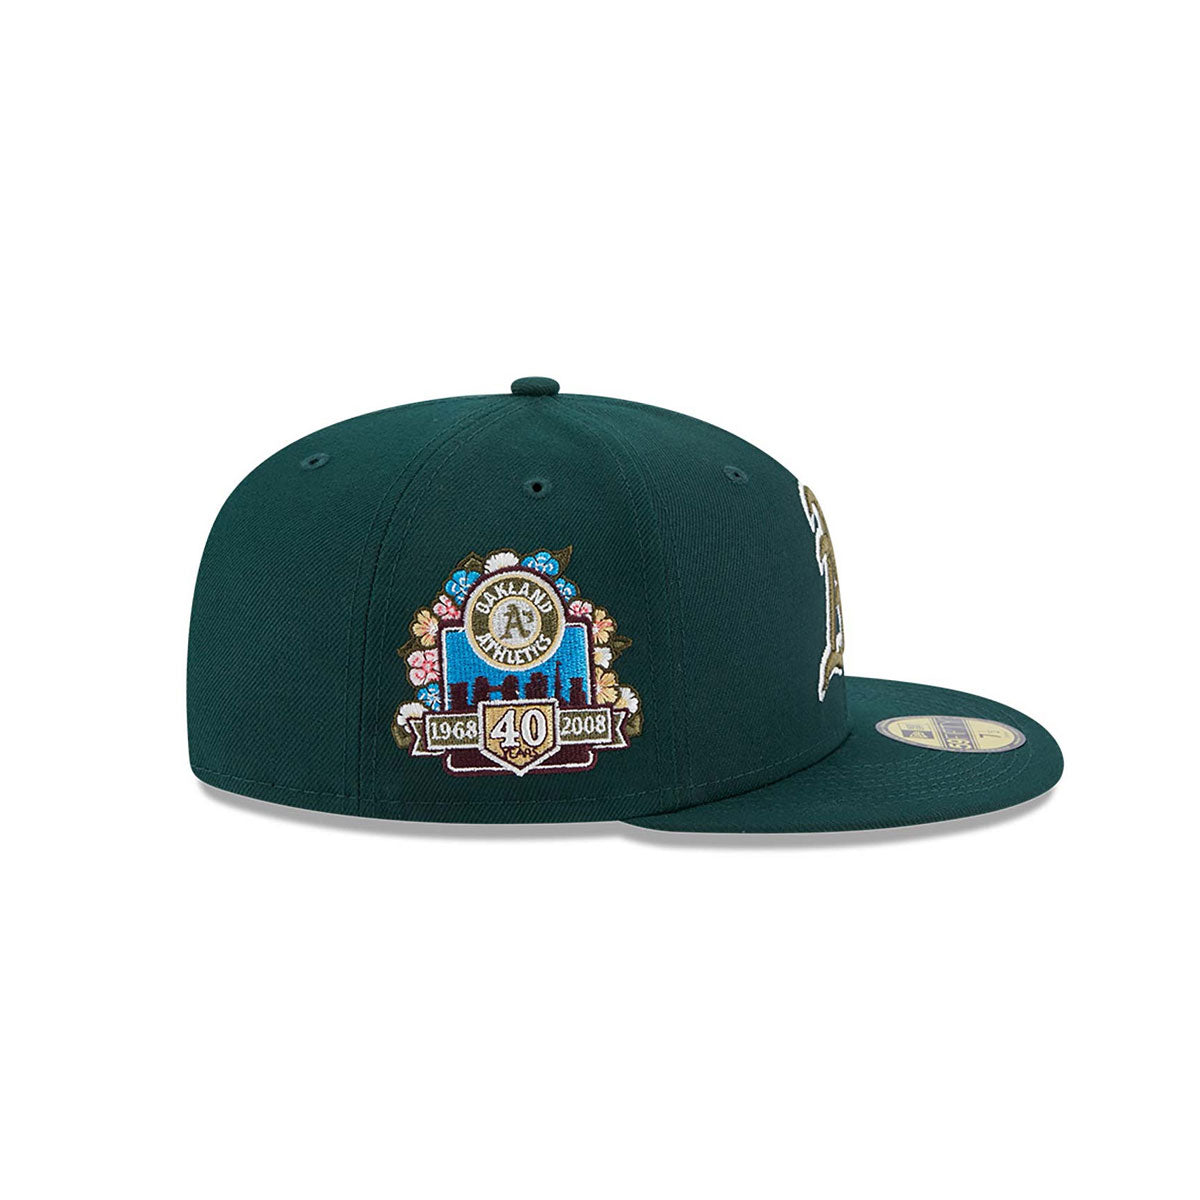 New Era Oakland Athletics Botanical Green 59FIFTY Fitted Hat